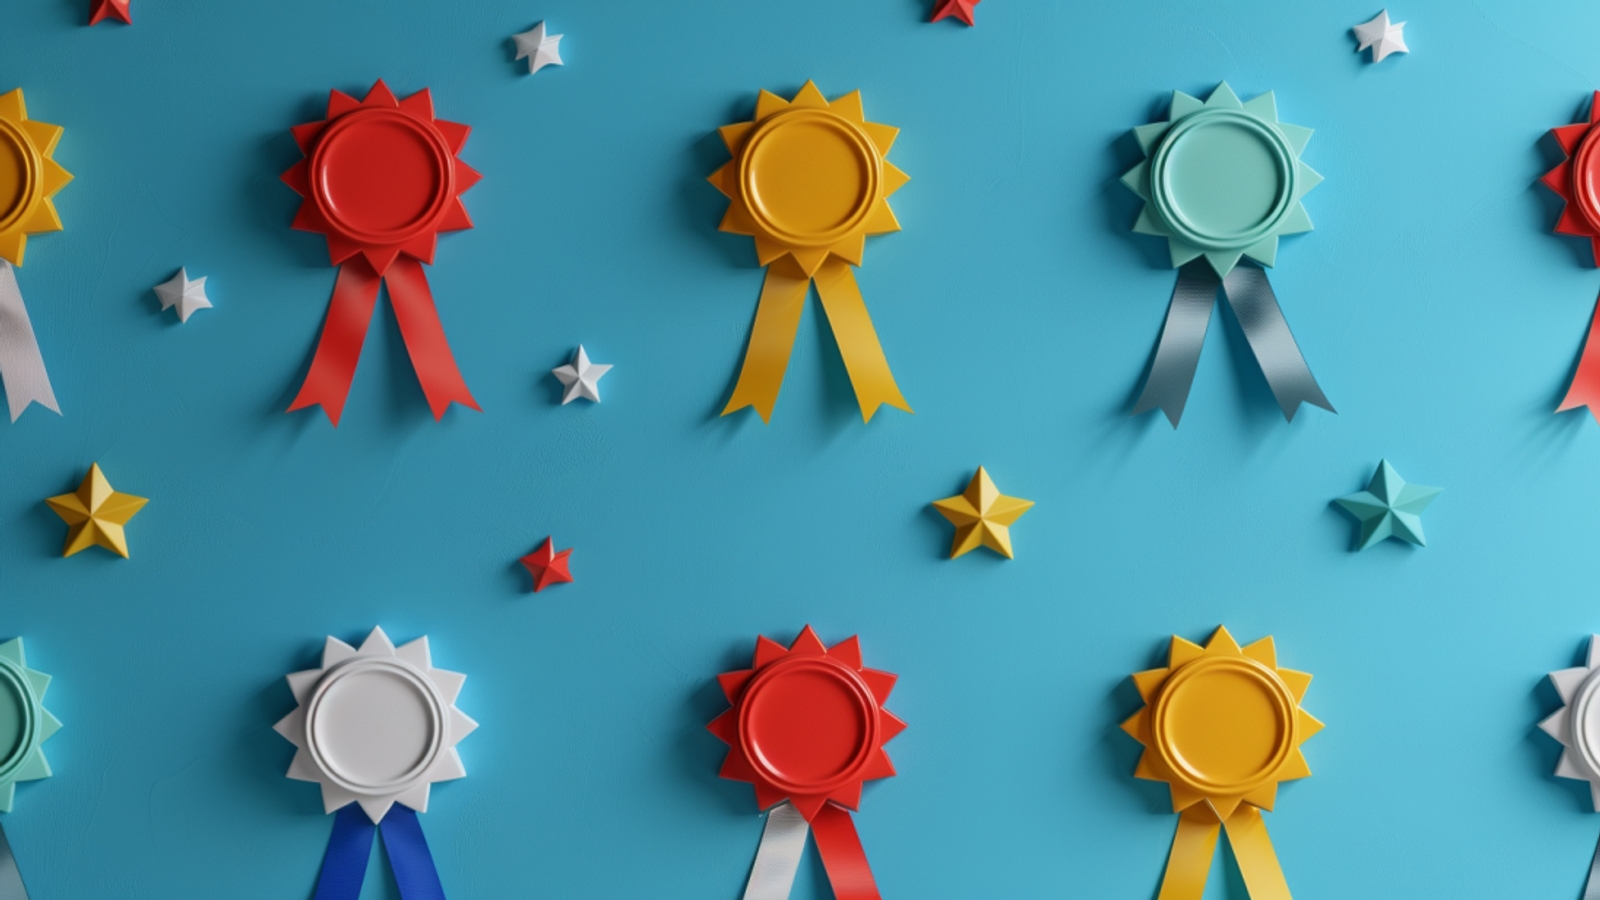 Rosette-style awards on a blue background